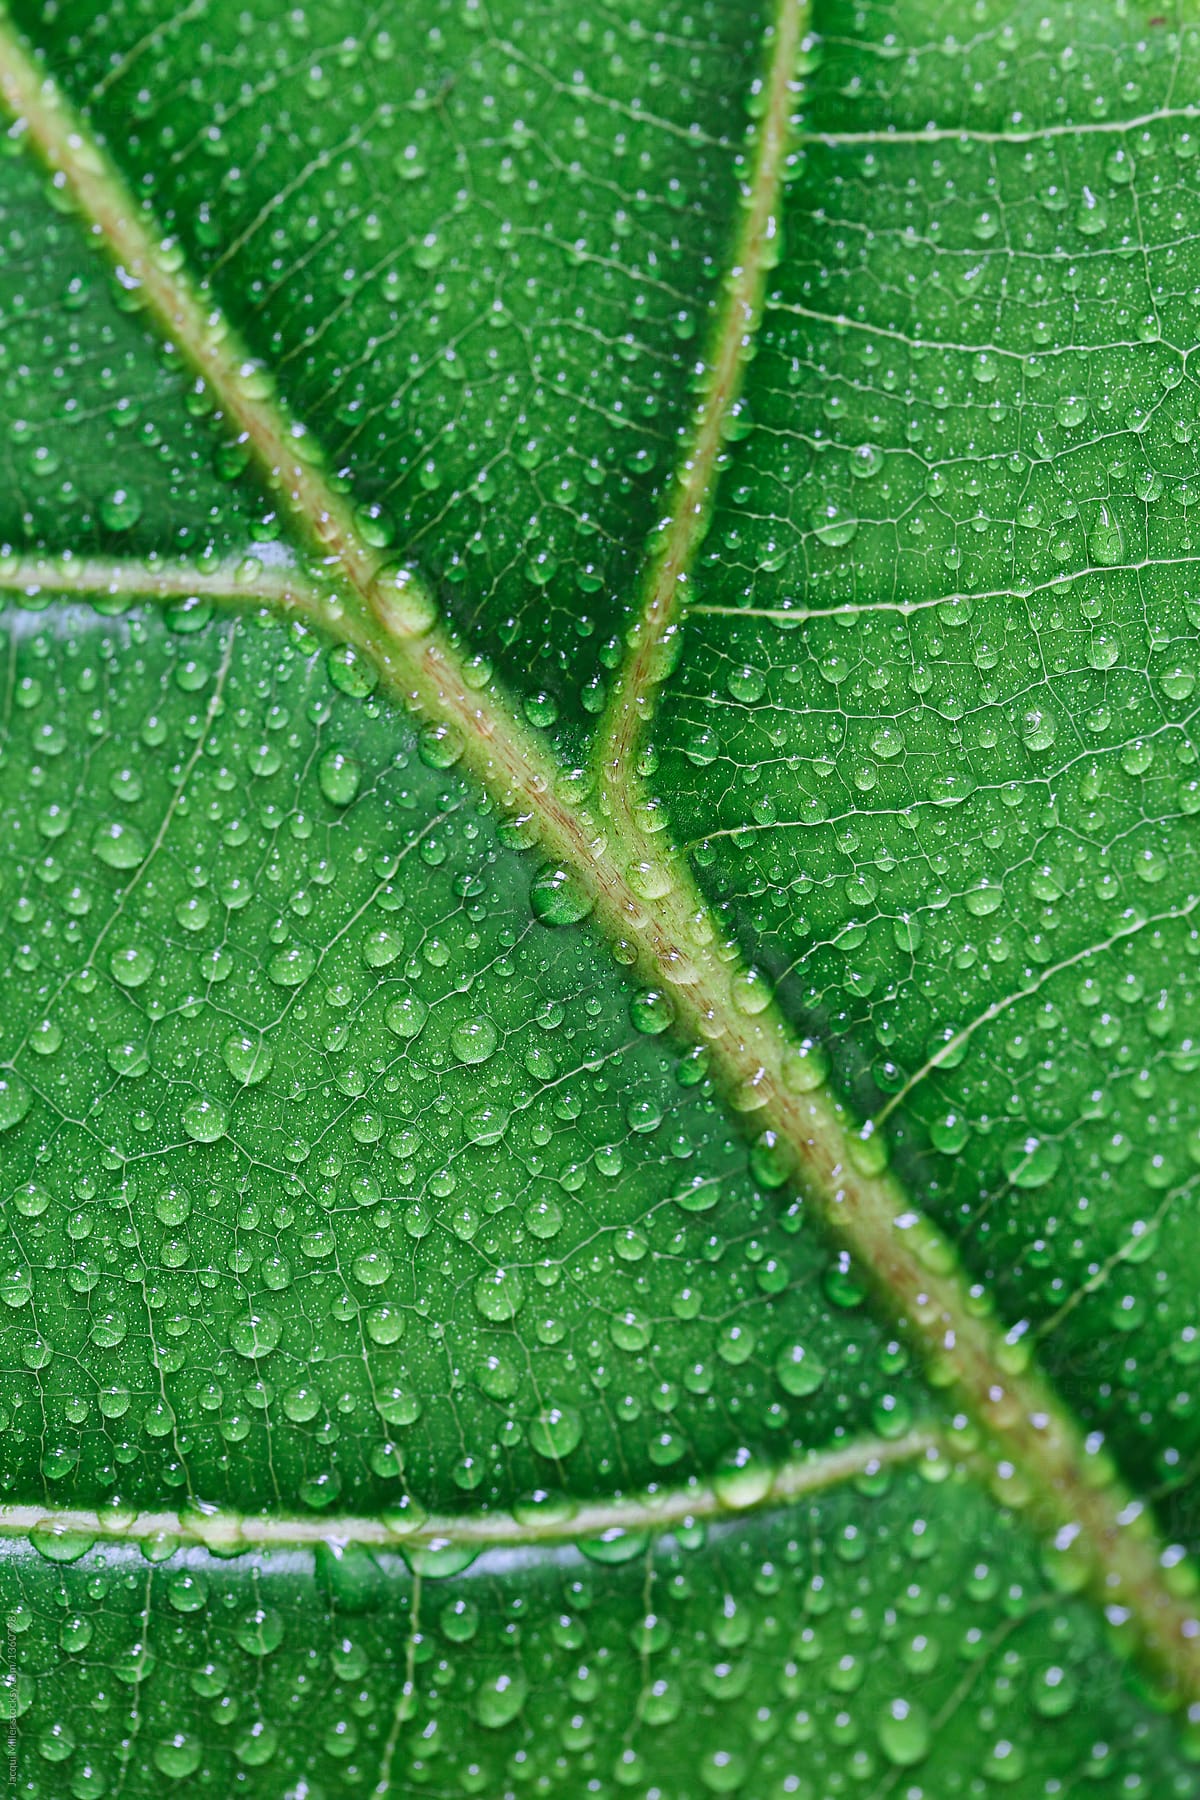 Close up of Ficus lyrata (Fiddle Leaf Fig) leaf with veins and water droplets